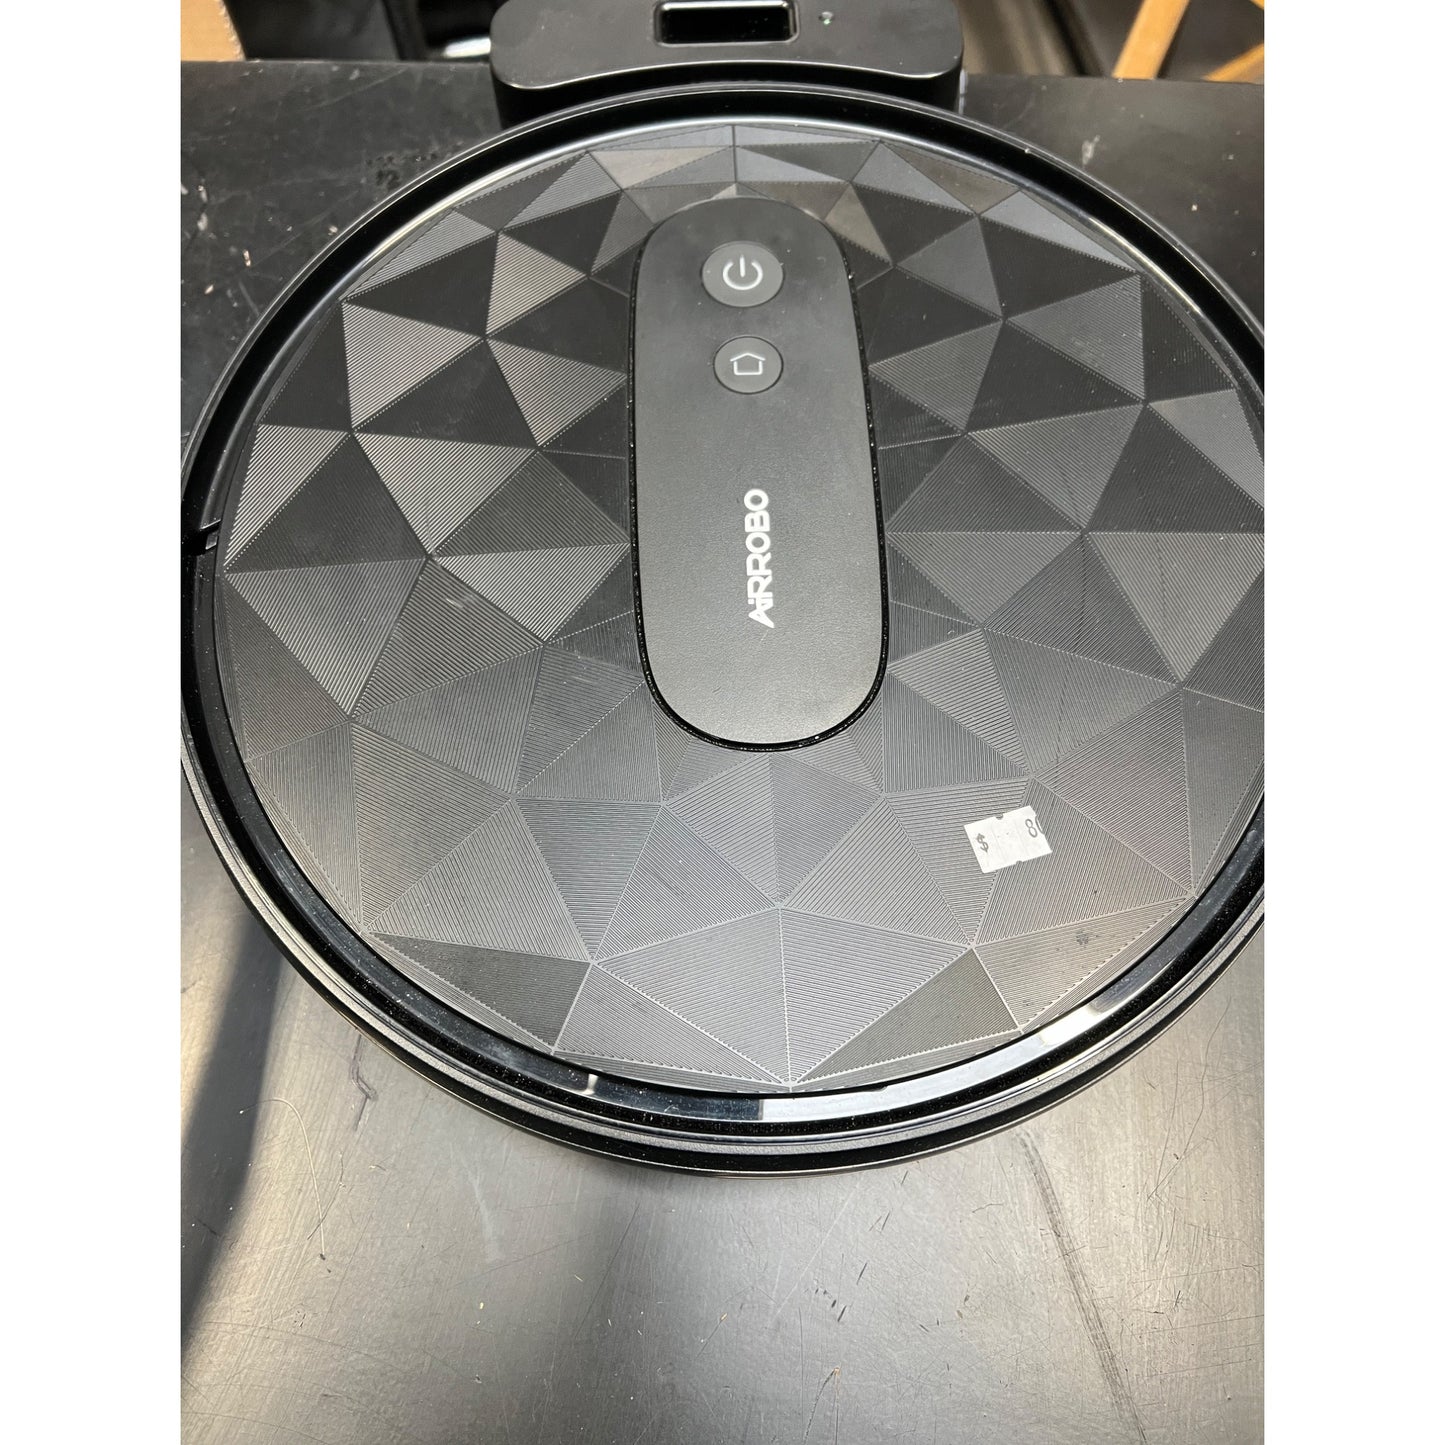 Robot Vacuum Cleaner - 2800 Pa Suction